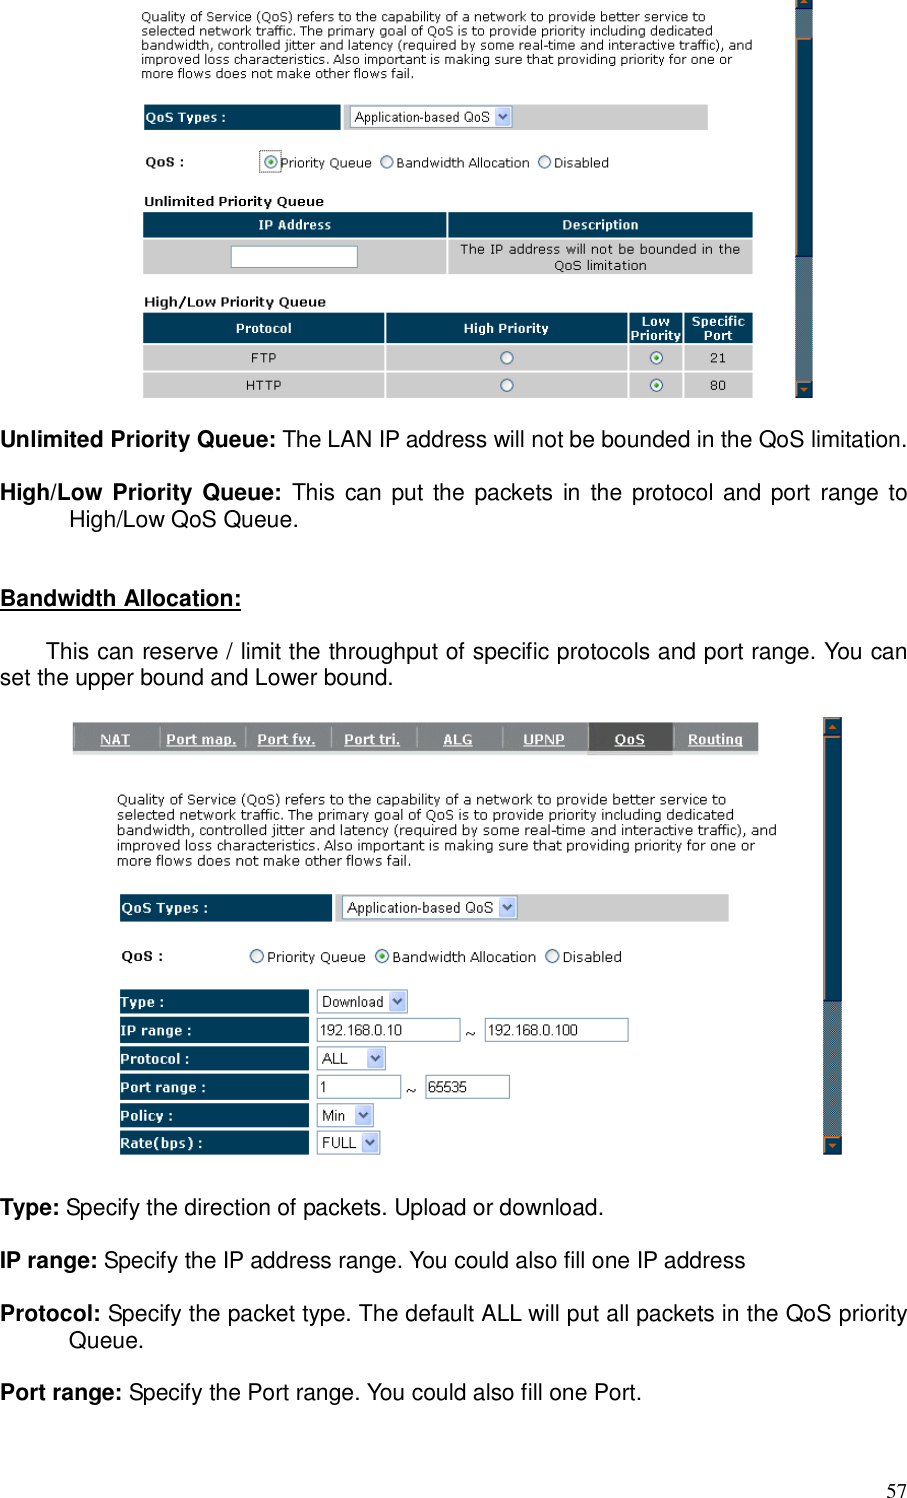  57   Unlimited Priority Queue: The LAN IP address will not be bounded in the QoS limitation.  High/Low Priority Queue:  This can put  the packets in  the protocol and port  range to High/Low QoS Queue.   Bandwidth Allocation:    This can reserve / limit the throughput of specific protocols and port range. You can set the upper bound and Lower bound.    Type: Specify the direction of packets. Upload or download.  IP range: Specify the IP address range. You could also fill one IP address  Protocol: Specify the packet type. The default ALL will put all packets in the QoS priority Queue.  Port range: Specify the Port range. You could also fill one Port.  